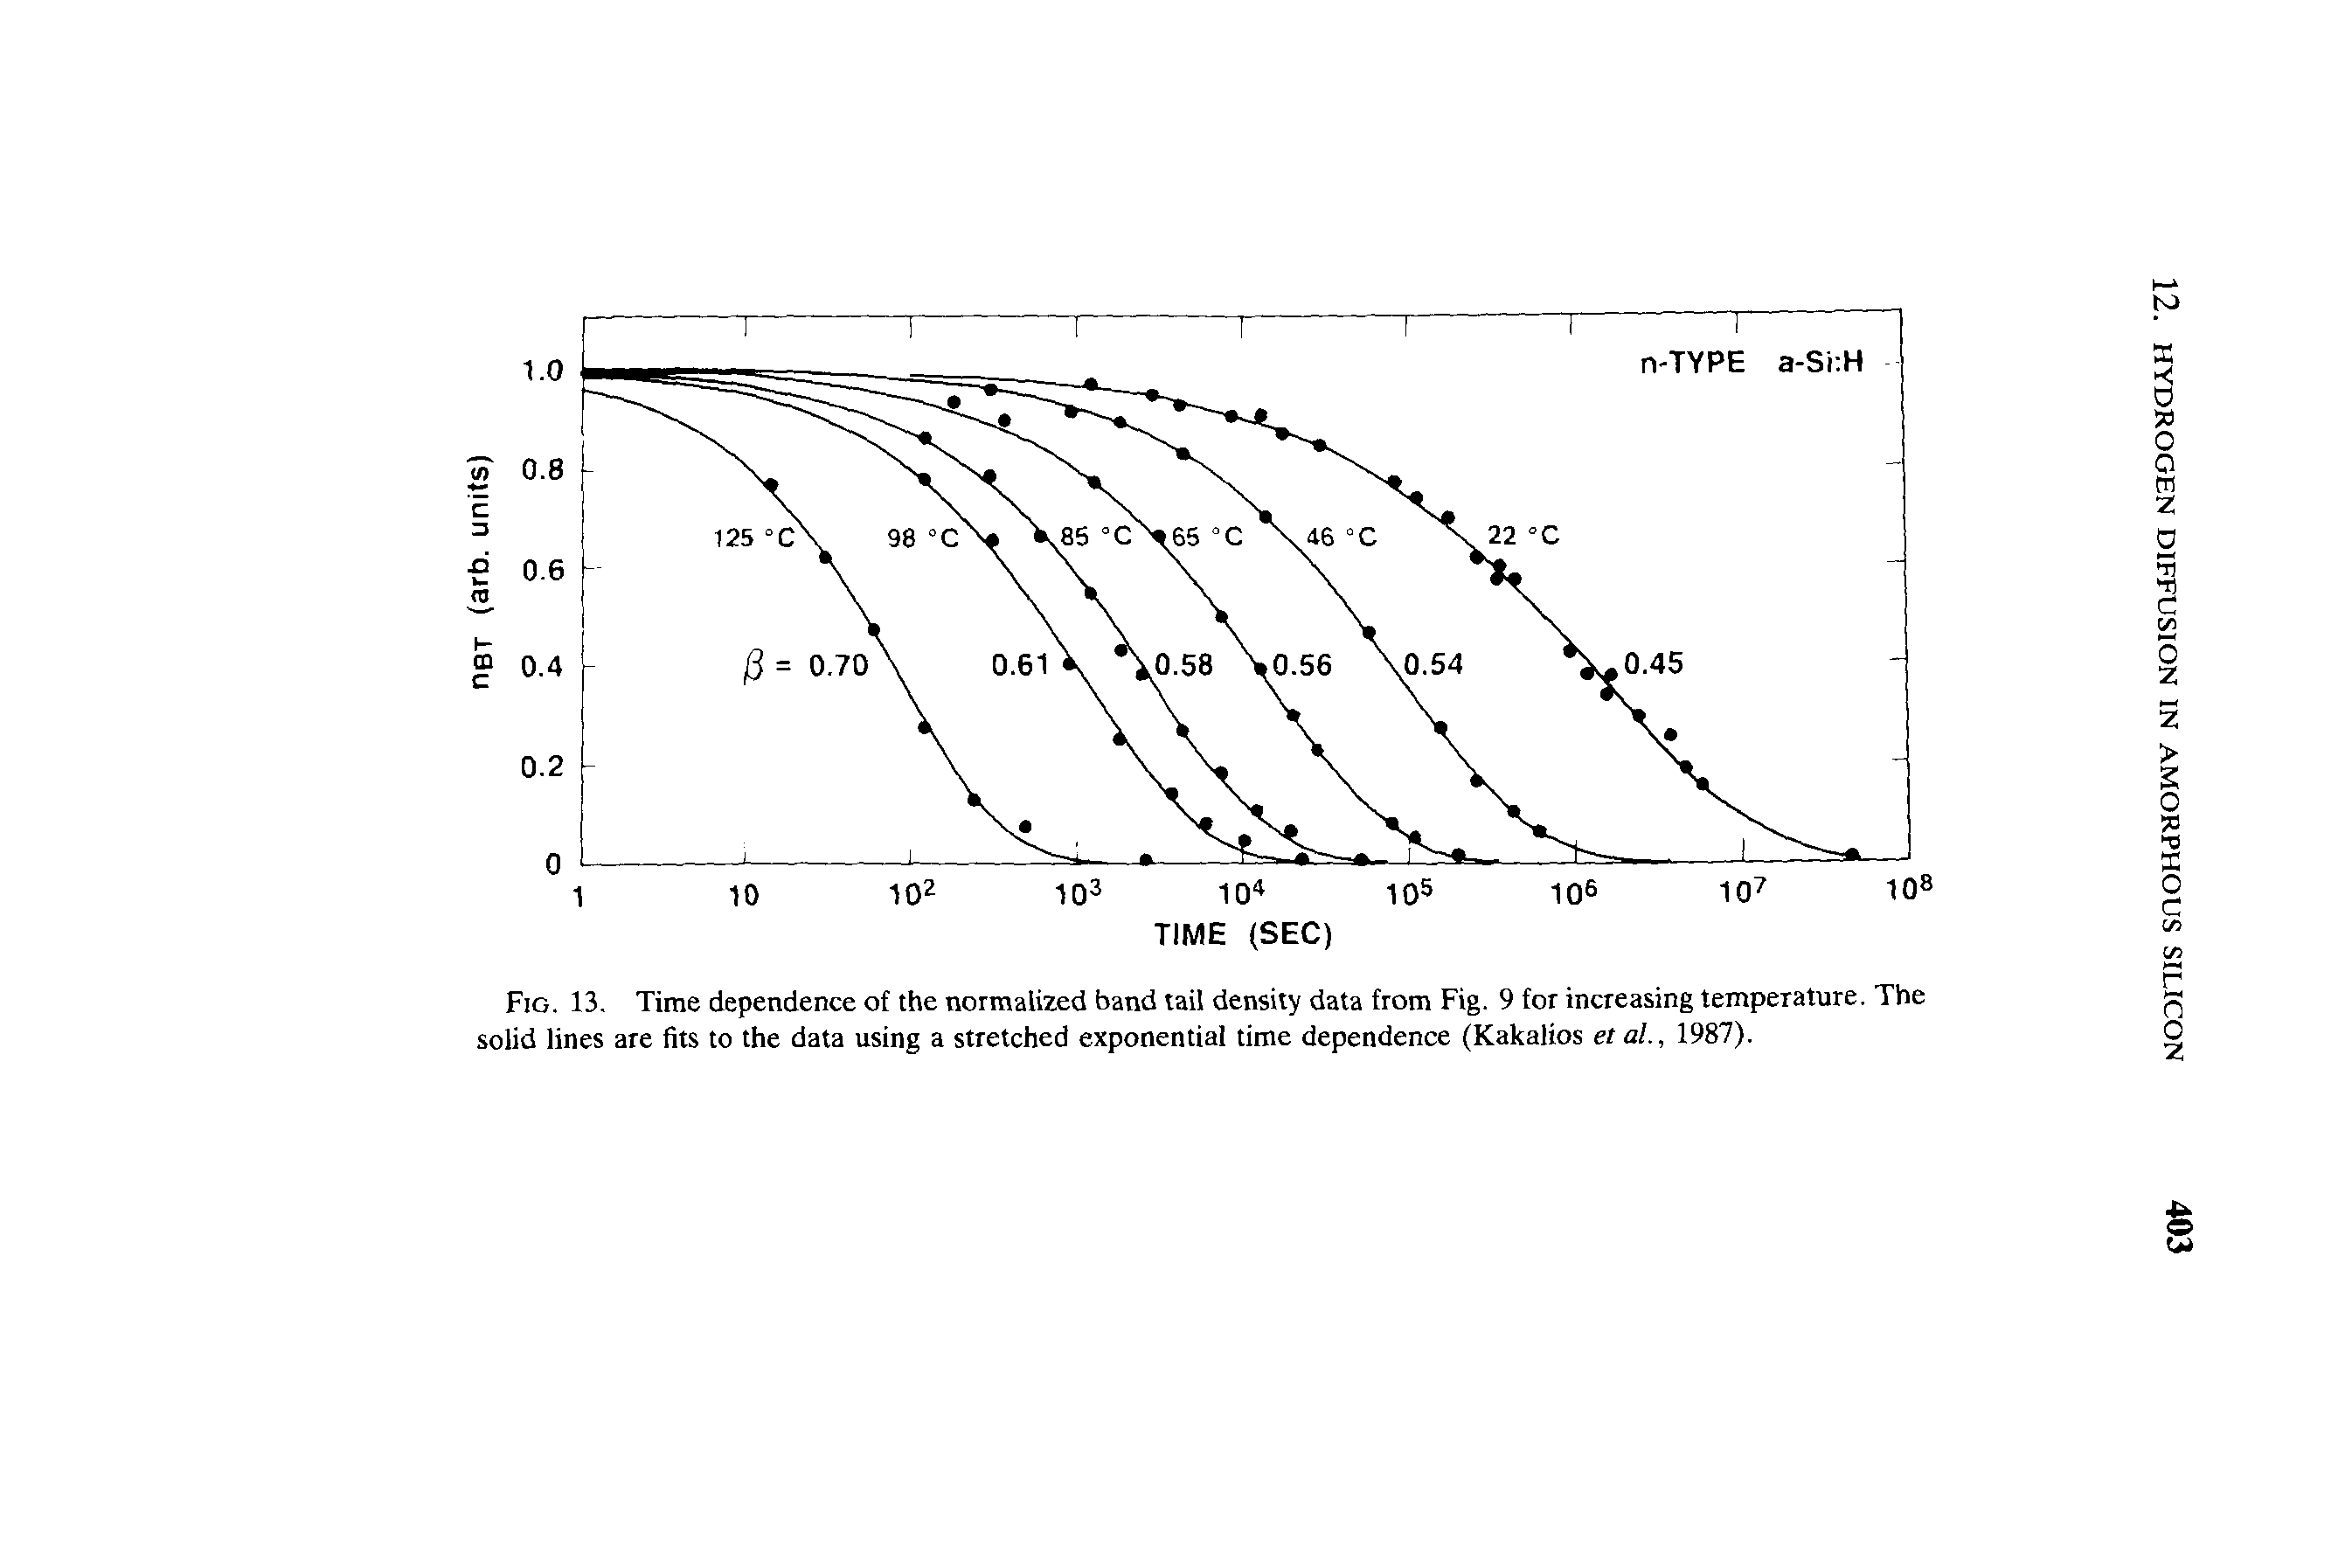 Fig. 13. Time dependence of the normalized band tail density data from Fig. 9 for increasing temperature. The solid lines are fits to the data using a stretched exponential time dependence (Kakalios et al., 1987).